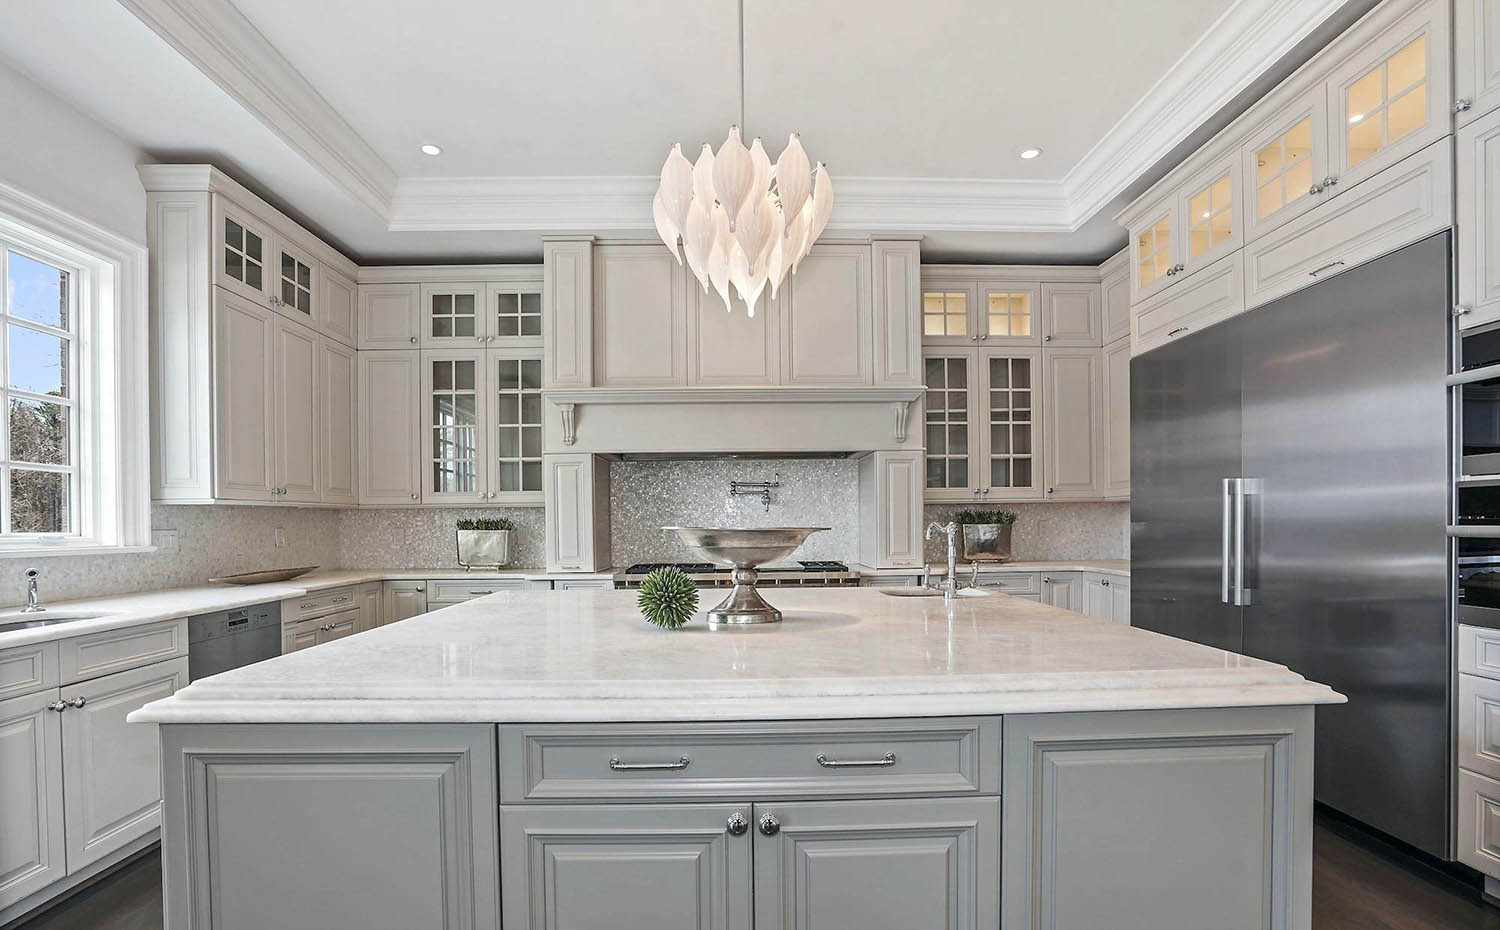 Light gray cream kitchen cabinets with a slightly darker gray island. Marble countertops.